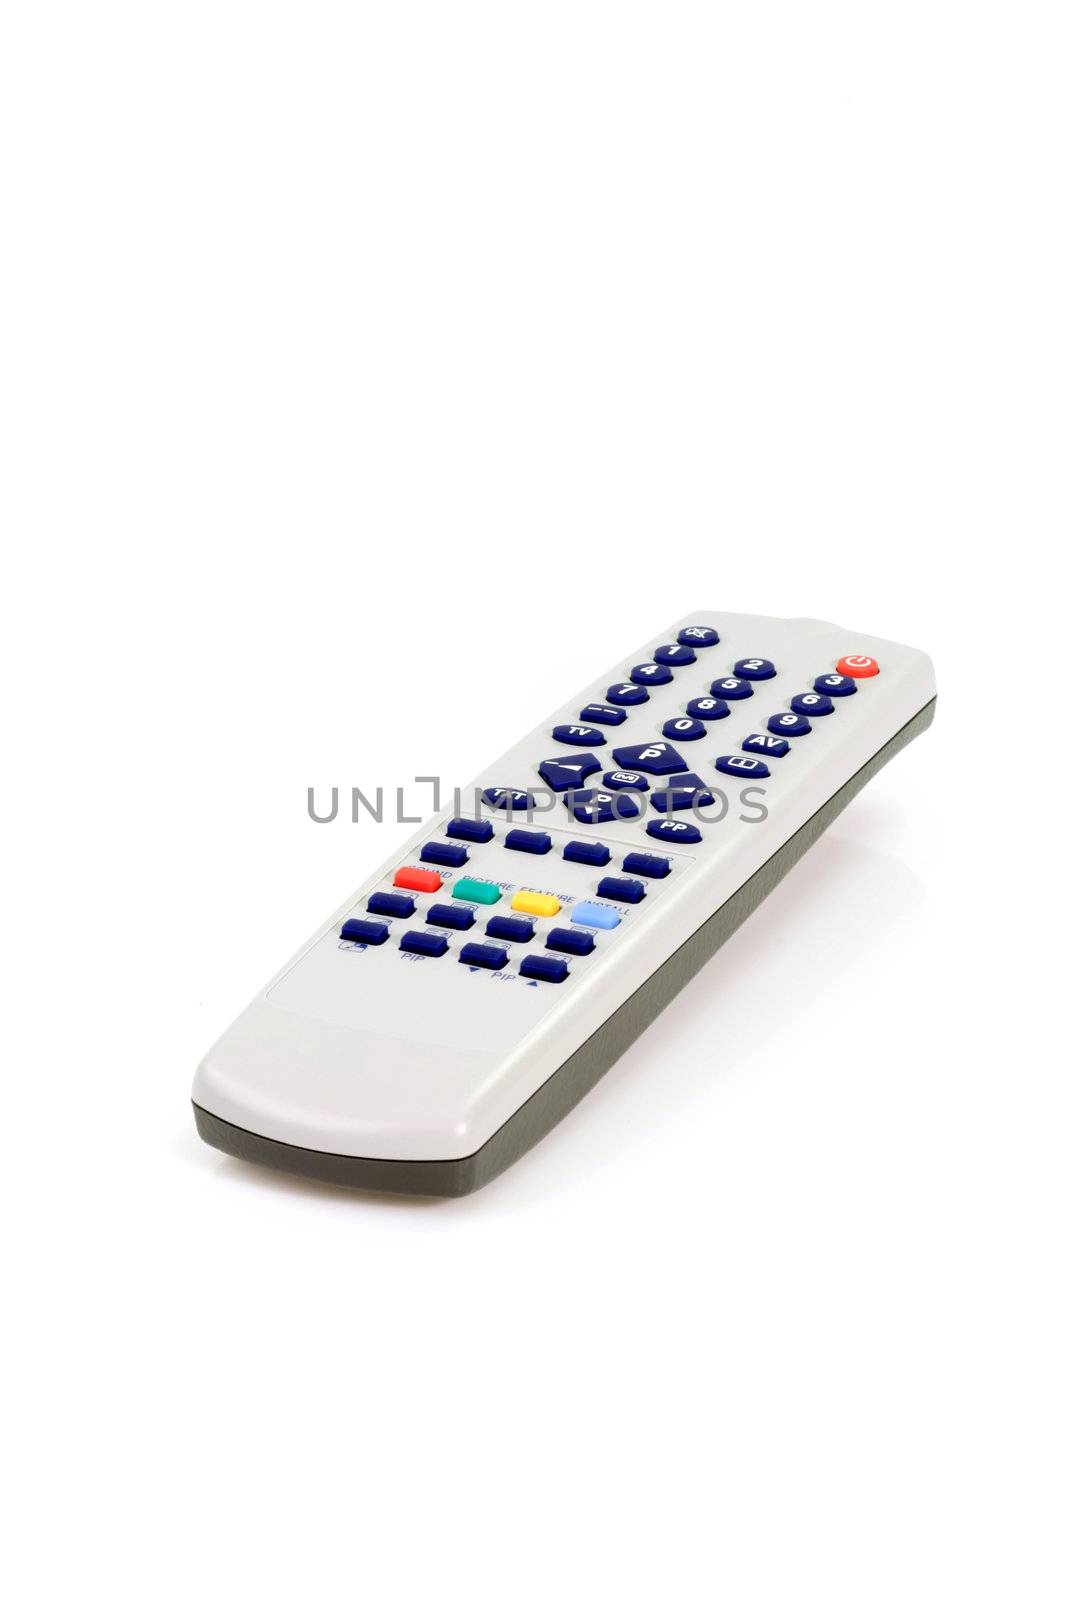 Close up of a grey remote control on white background